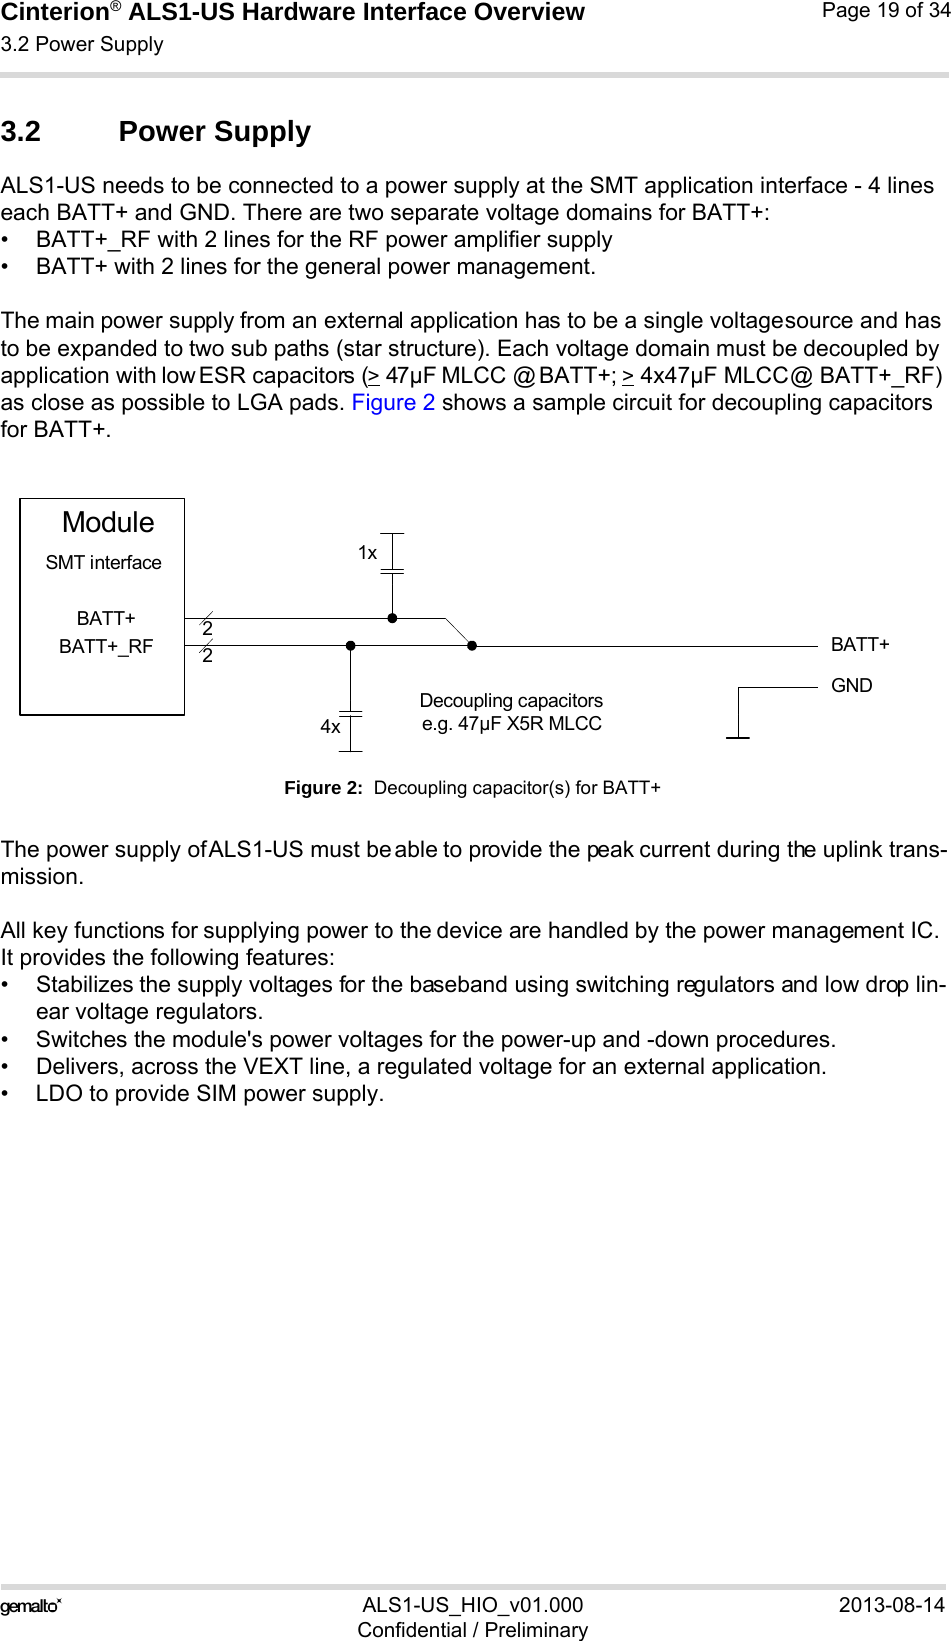 Cinterion® ALS1-US Hardware Interface Overview3.2 Power Supply23ALS1-US_HIO_v01.000 2013-08-14Confidential / PreliminaryPage 19 of 343.2 Power SupplyALS1-US needs to be connected to a power supply at the SMT application interface - 4 lines each BATT+ and GND. There are two separate voltage domains for BATT+:• BATT+_RF with 2 lines for the RF power amplifier supply • BATT+ with 2 lines for the general power management. The main power supply from an external application has to be a single voltage source and has to be expanded to two sub paths (star structure). Each voltage domain must be decoupled by application with low ESR capacitors (&gt; 47µF MLCC @ BATT+; &gt; 4x47µF MLCC @ BATT+_RF) as close as possible to LGA pads. Figure 2 shows a sample circuit for decoupling capacitors for BATT+.Figure 2:  Decoupling capacitor(s) for BATT+The power supply of ALS1-US must be able to provide the peak current during the uplink trans-mission. All key functions for supplying power to the device are handled by the power management IC. It provides the following features:• Stabilizes the supply voltages for the baseband using switching regulators and low drop lin-ear voltage regulators.• Switches the module&apos;s power voltages for the power-up and -down procedures.• Delivers, across the VEXT line, a regulated voltage for an external application.• LDO to provide SIM power supply.BATT+22Decoupling capacitorse.g. 47µF X5R MLCC4xGNDBATT+BATT+_RFModuleSMT interface 1x